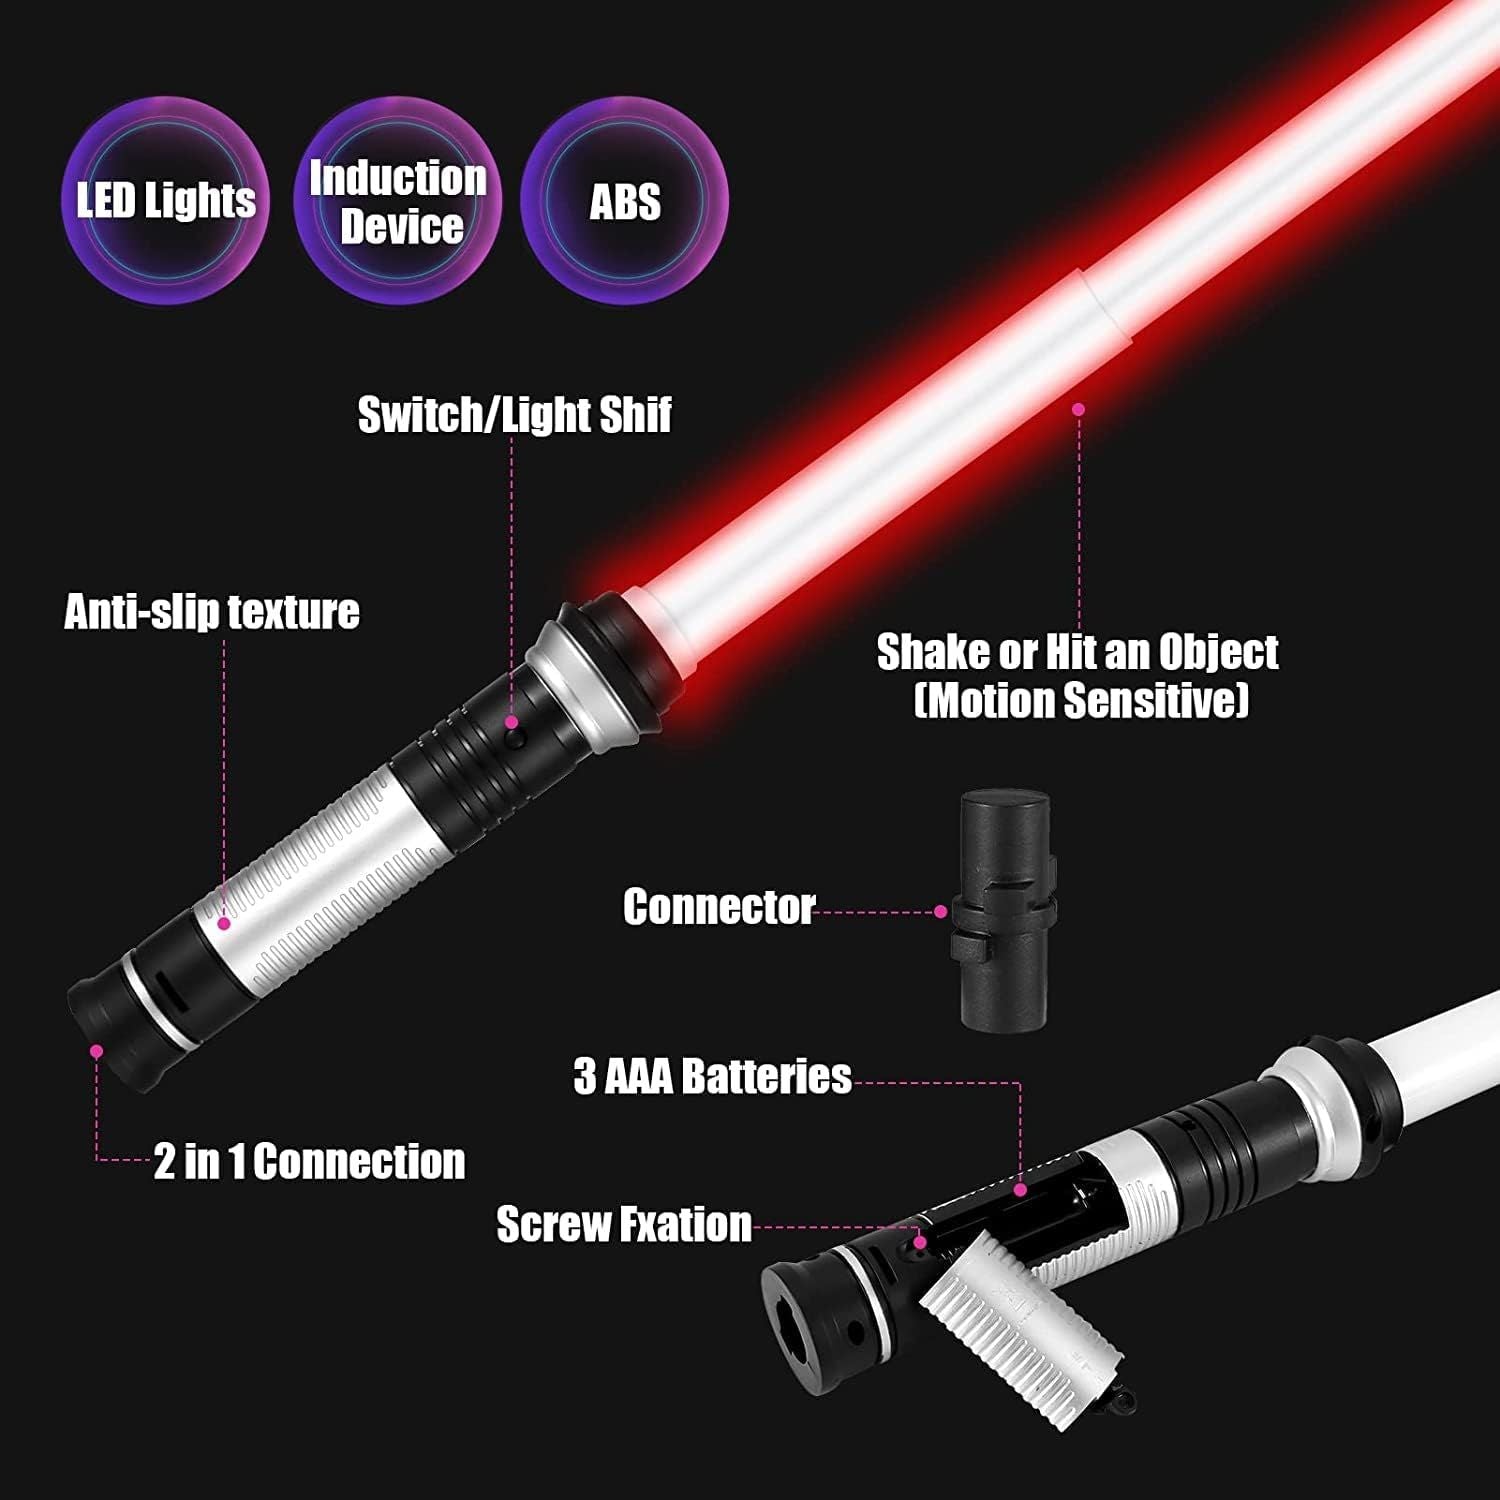 Two LED Light Up Sabers with Sound - Retractable 7 Colors Light Saber Sword for Kids - 2 Pack, including Darth Maul's lightsaber, against a dark background.